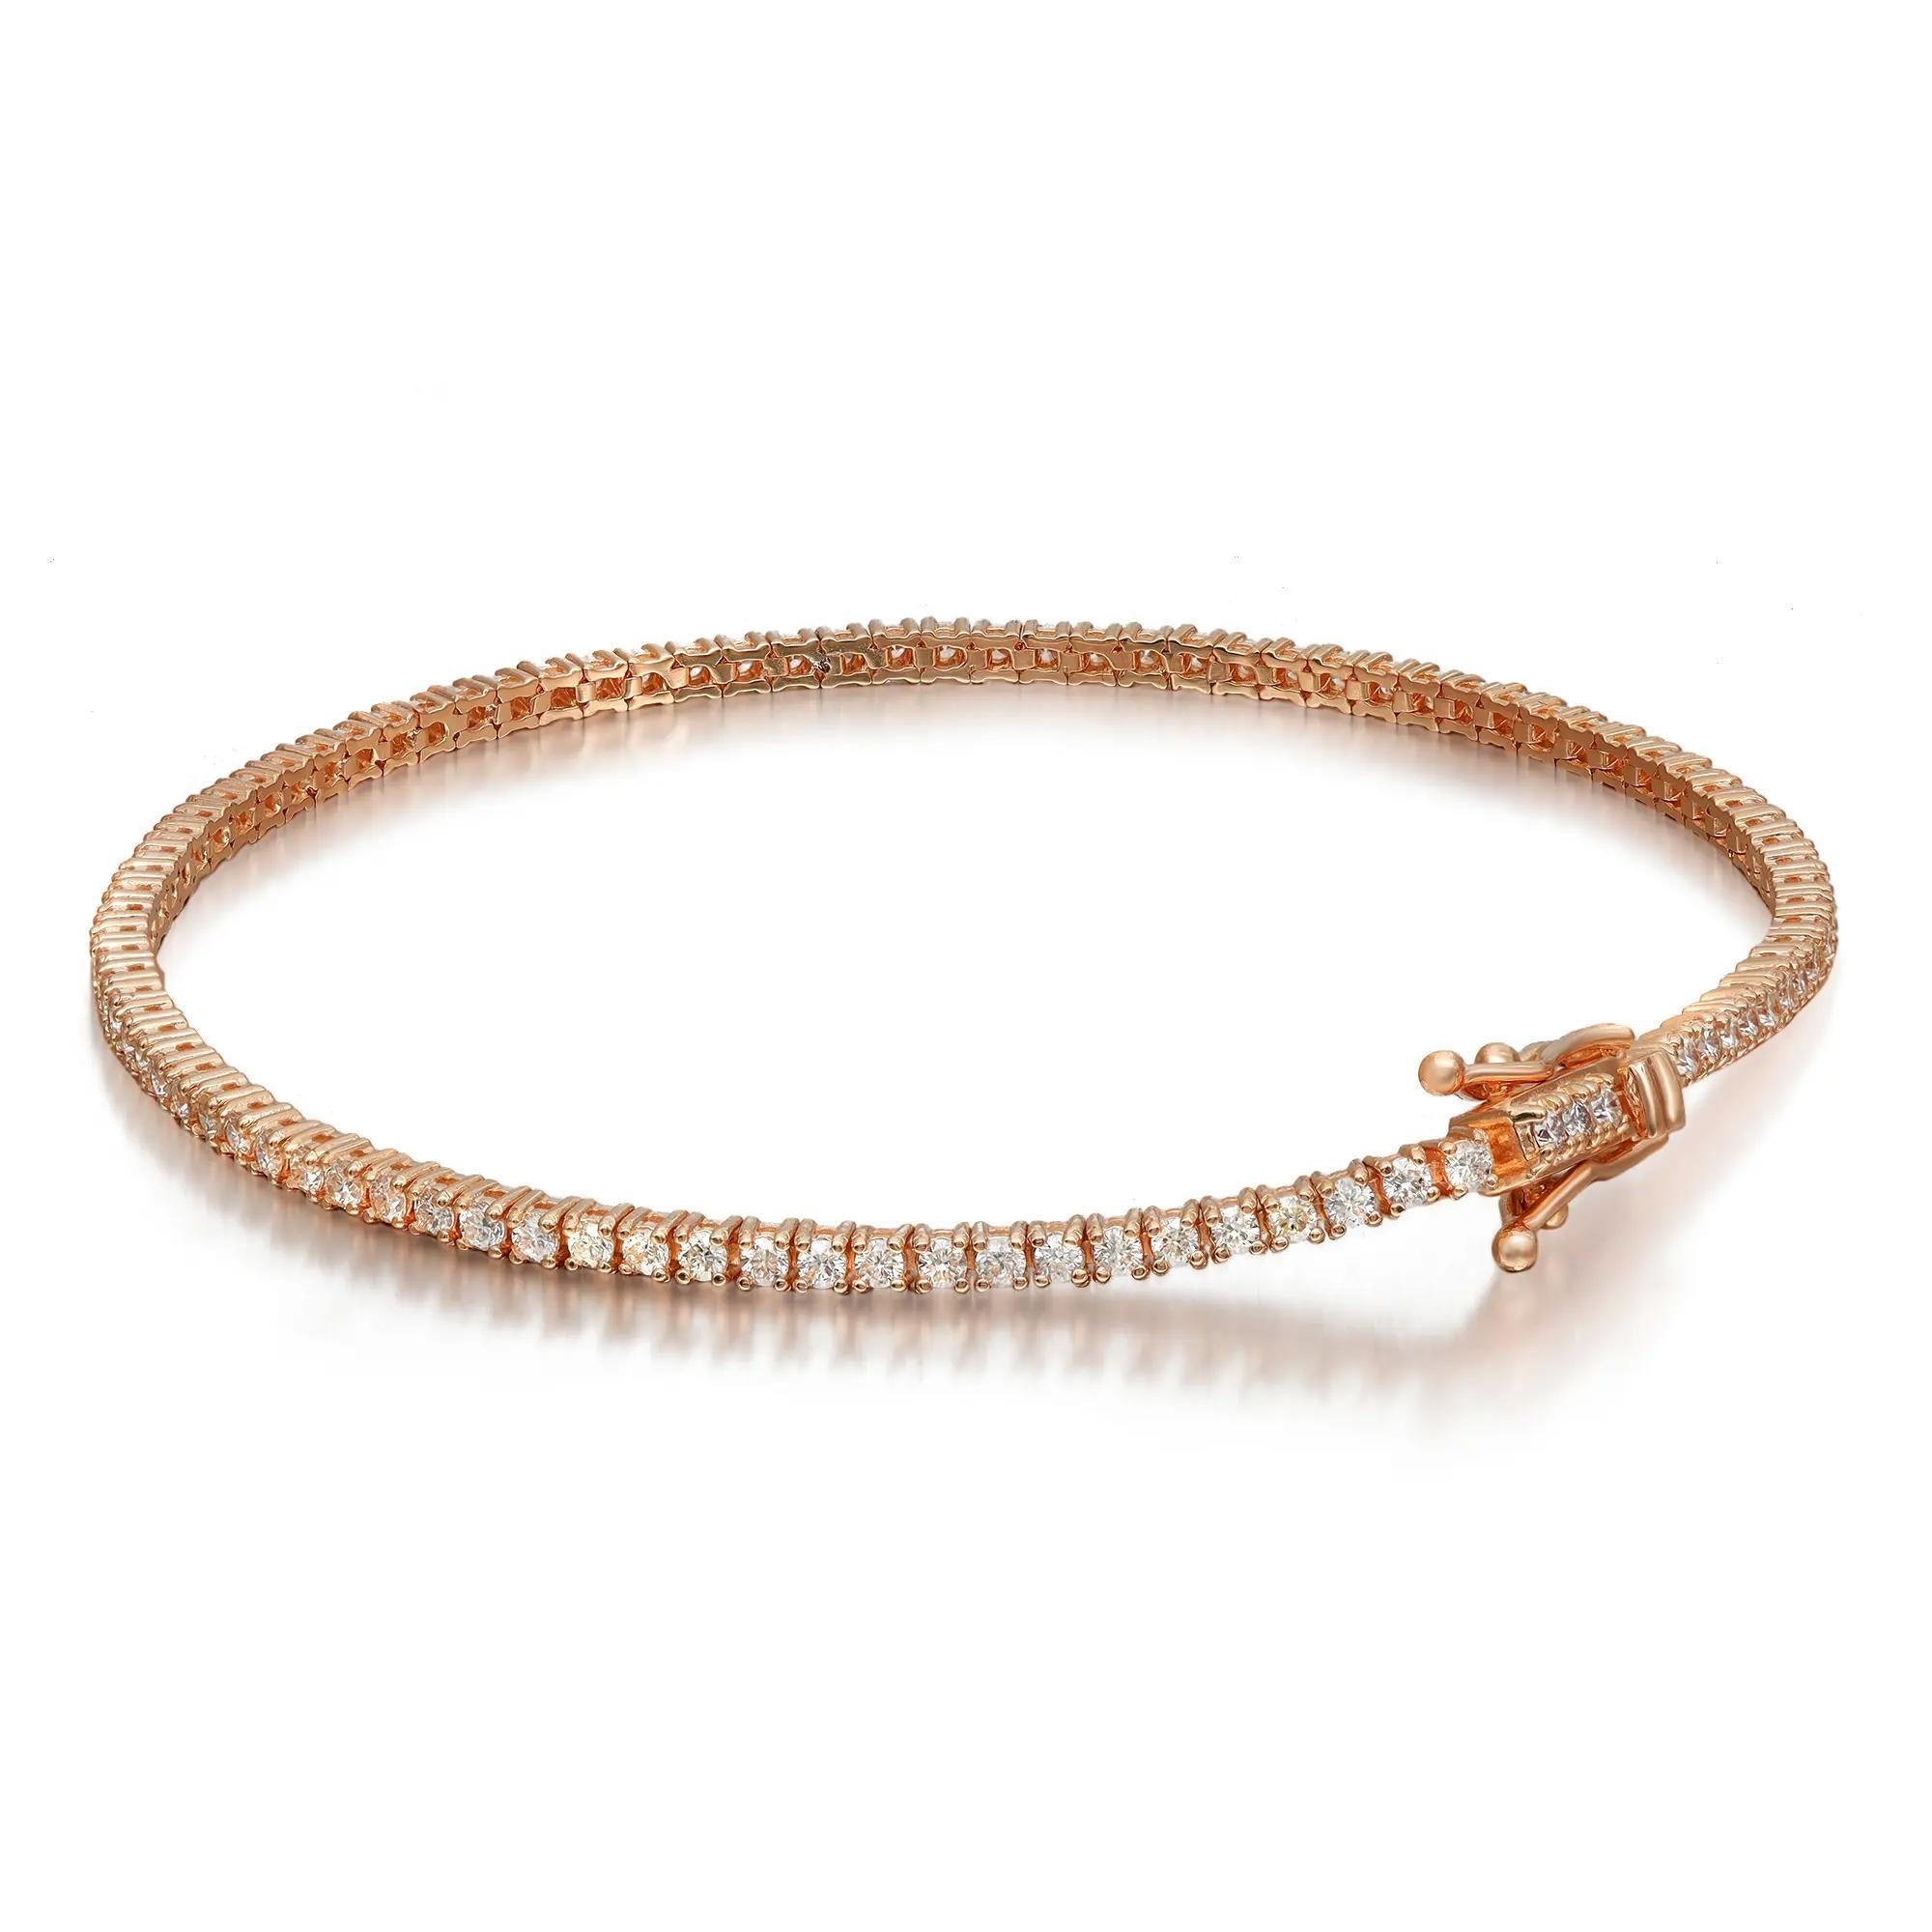 This beautifully crafted Rachel Koen tennis bracelet features prong set round brilliant cut diamonds studded in lustrous 14K rose gold. Total white diamond weight: 0.95 carat. Diamond Quality: G-H color and VS-SI clarity. Bracelet length: 7 inches.